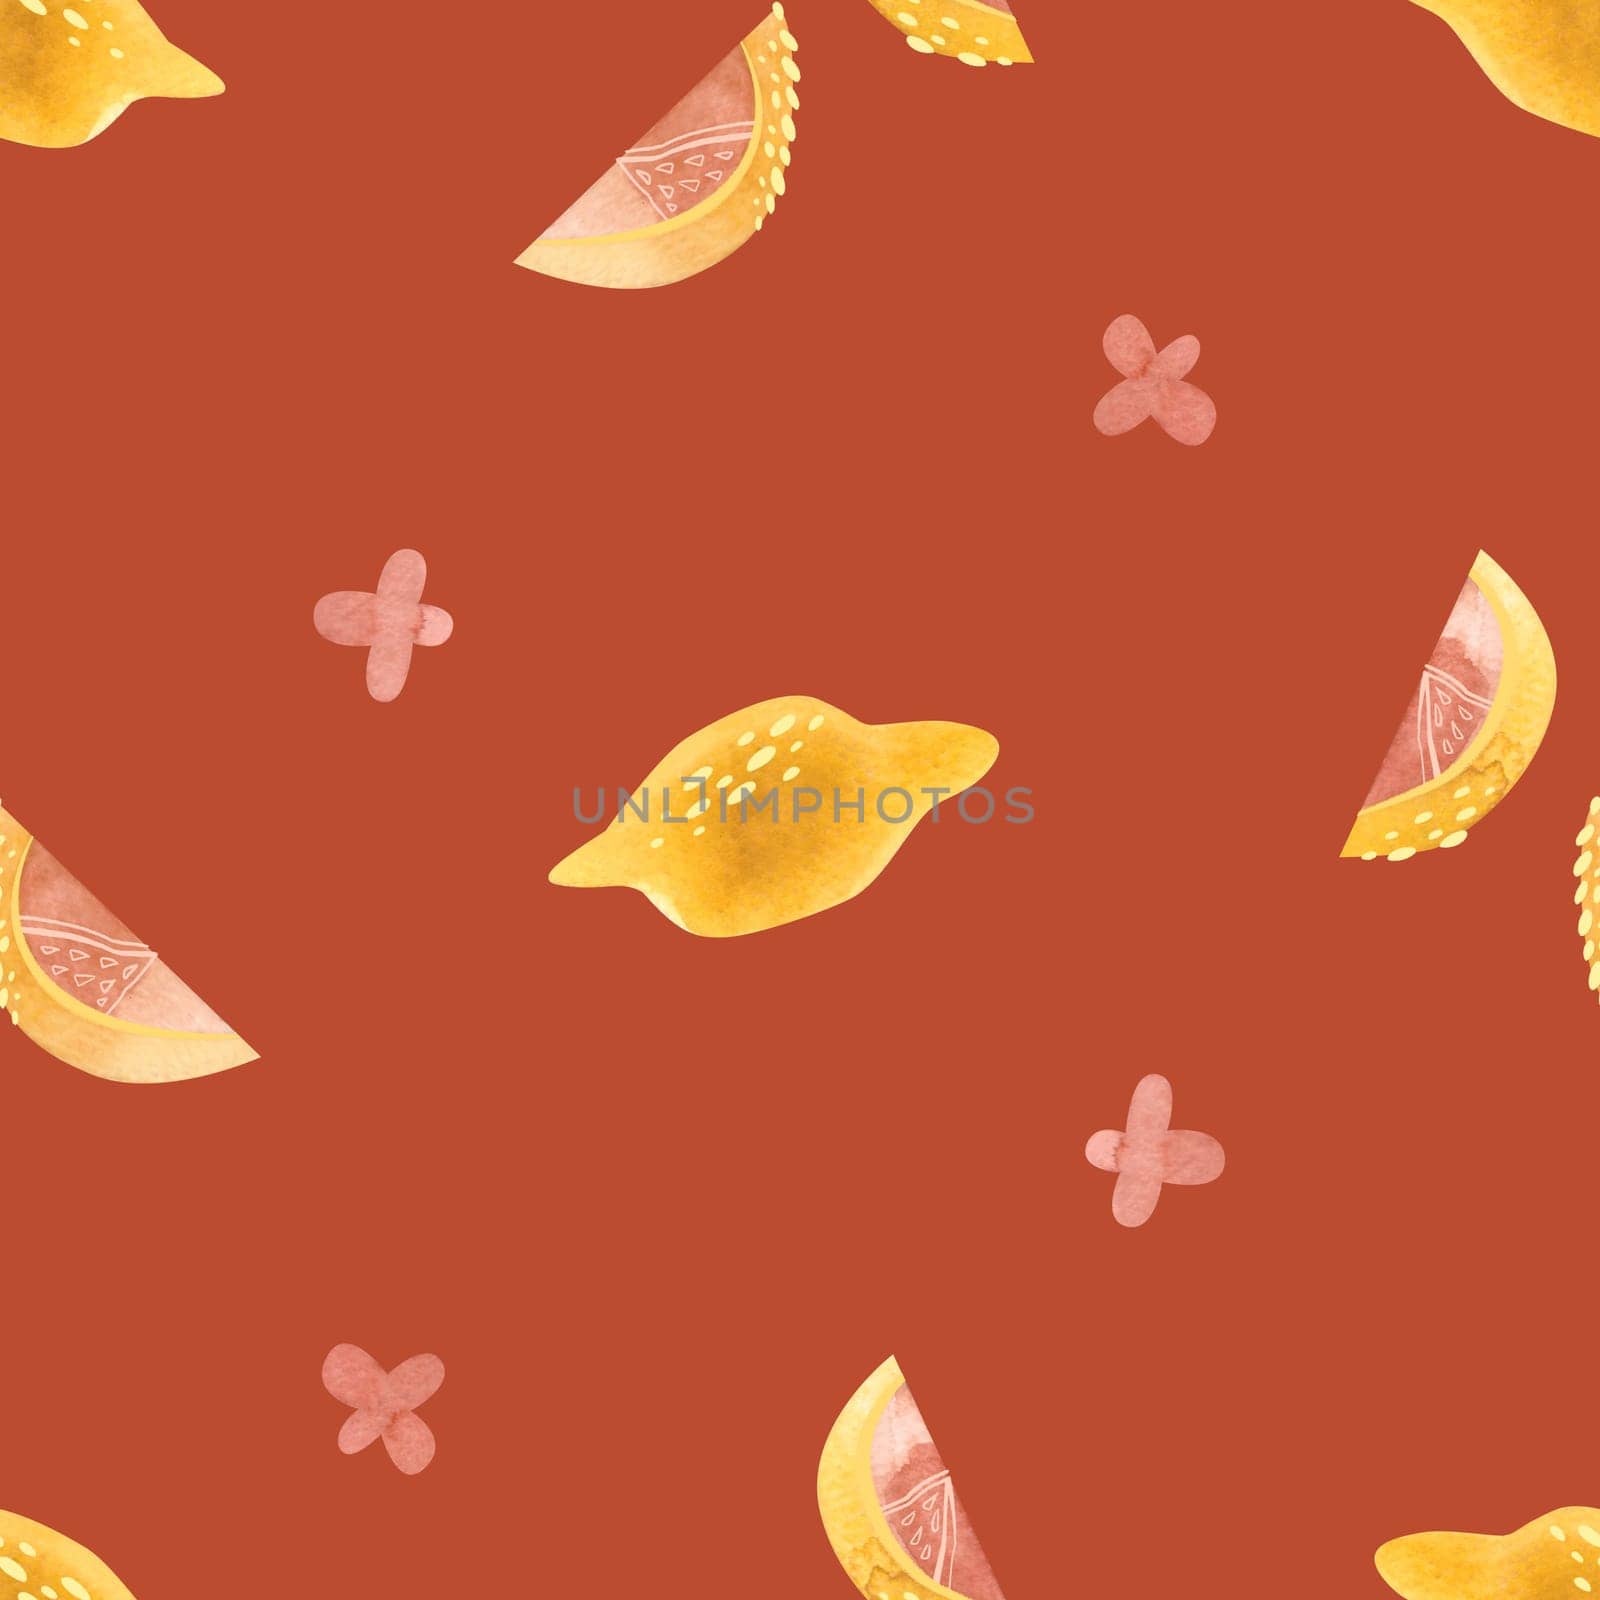 Lemons, lemon slices and pink lemon flowers. Seamless watercolor pattern for fabric, wallpaper, wrapping paper, packaging cosmetics, tablecloths, curtains and home textiles